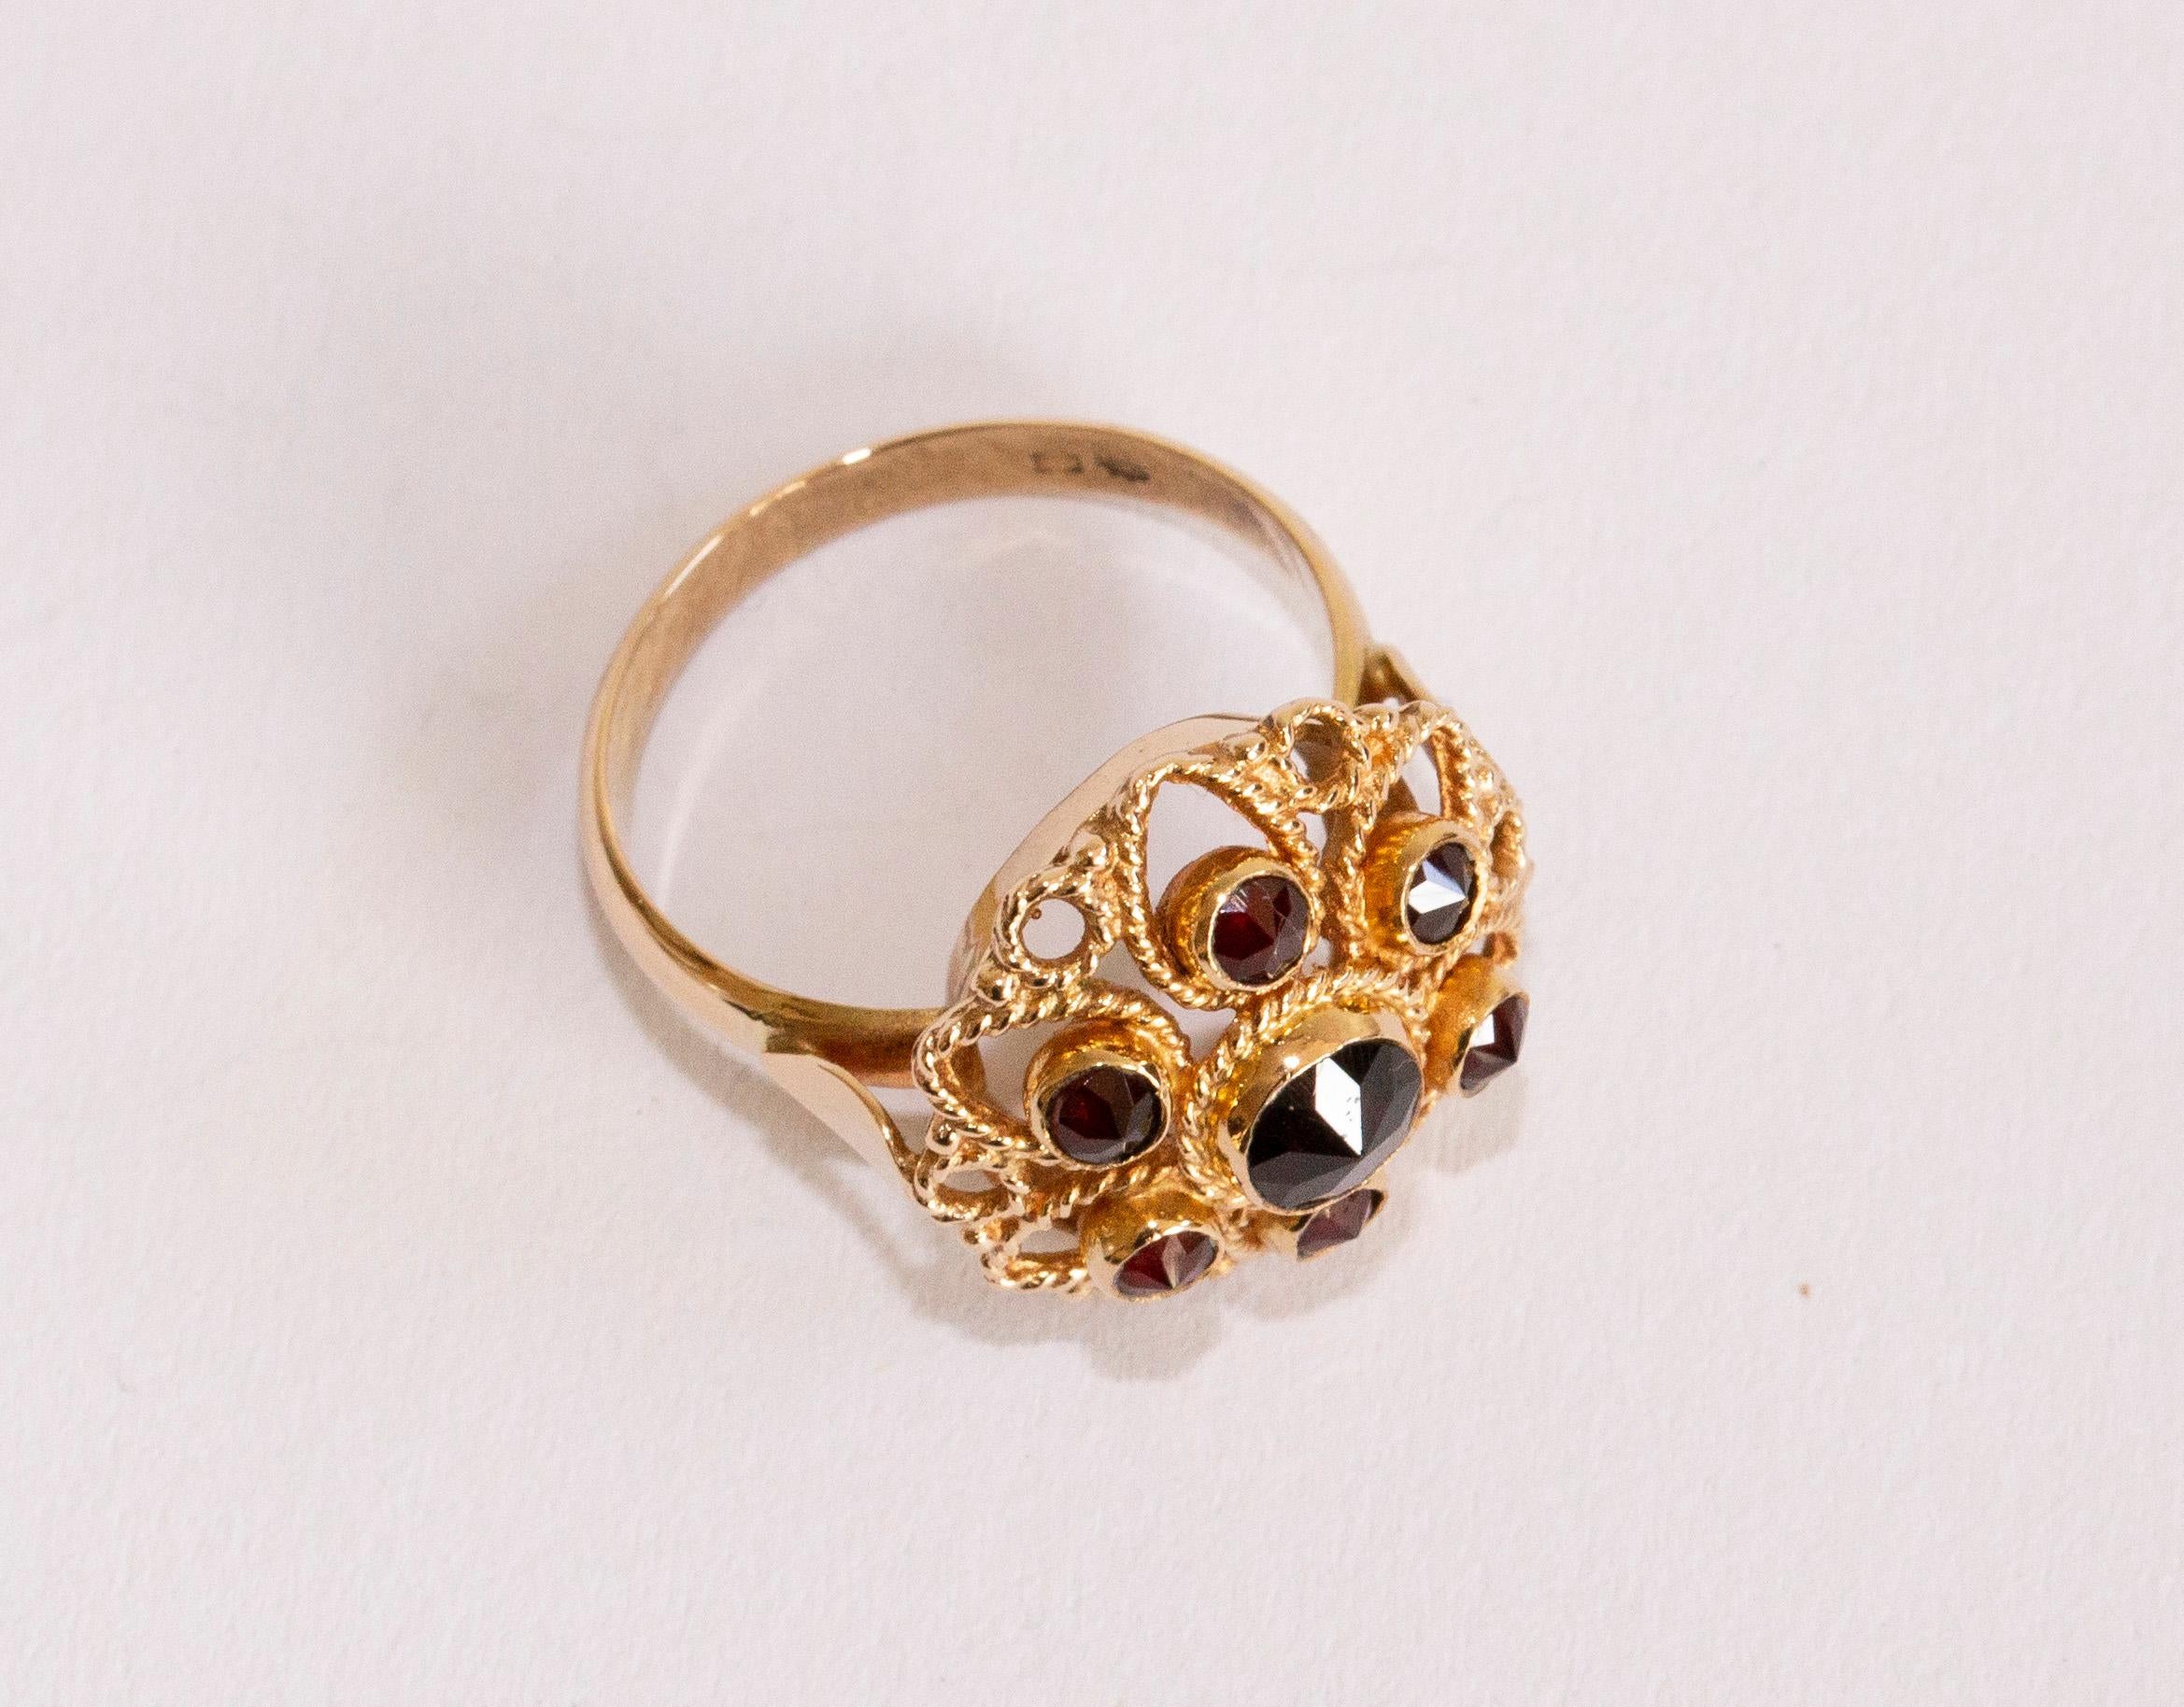 A 14 karat yellow gold rosette ring with garnet. The ring is set with 7 faceted garnets in filigree flower setting made of cord frame. The ring is stamped with 585 that stands for the 14 karat gold content. It was also acid tested for the gold